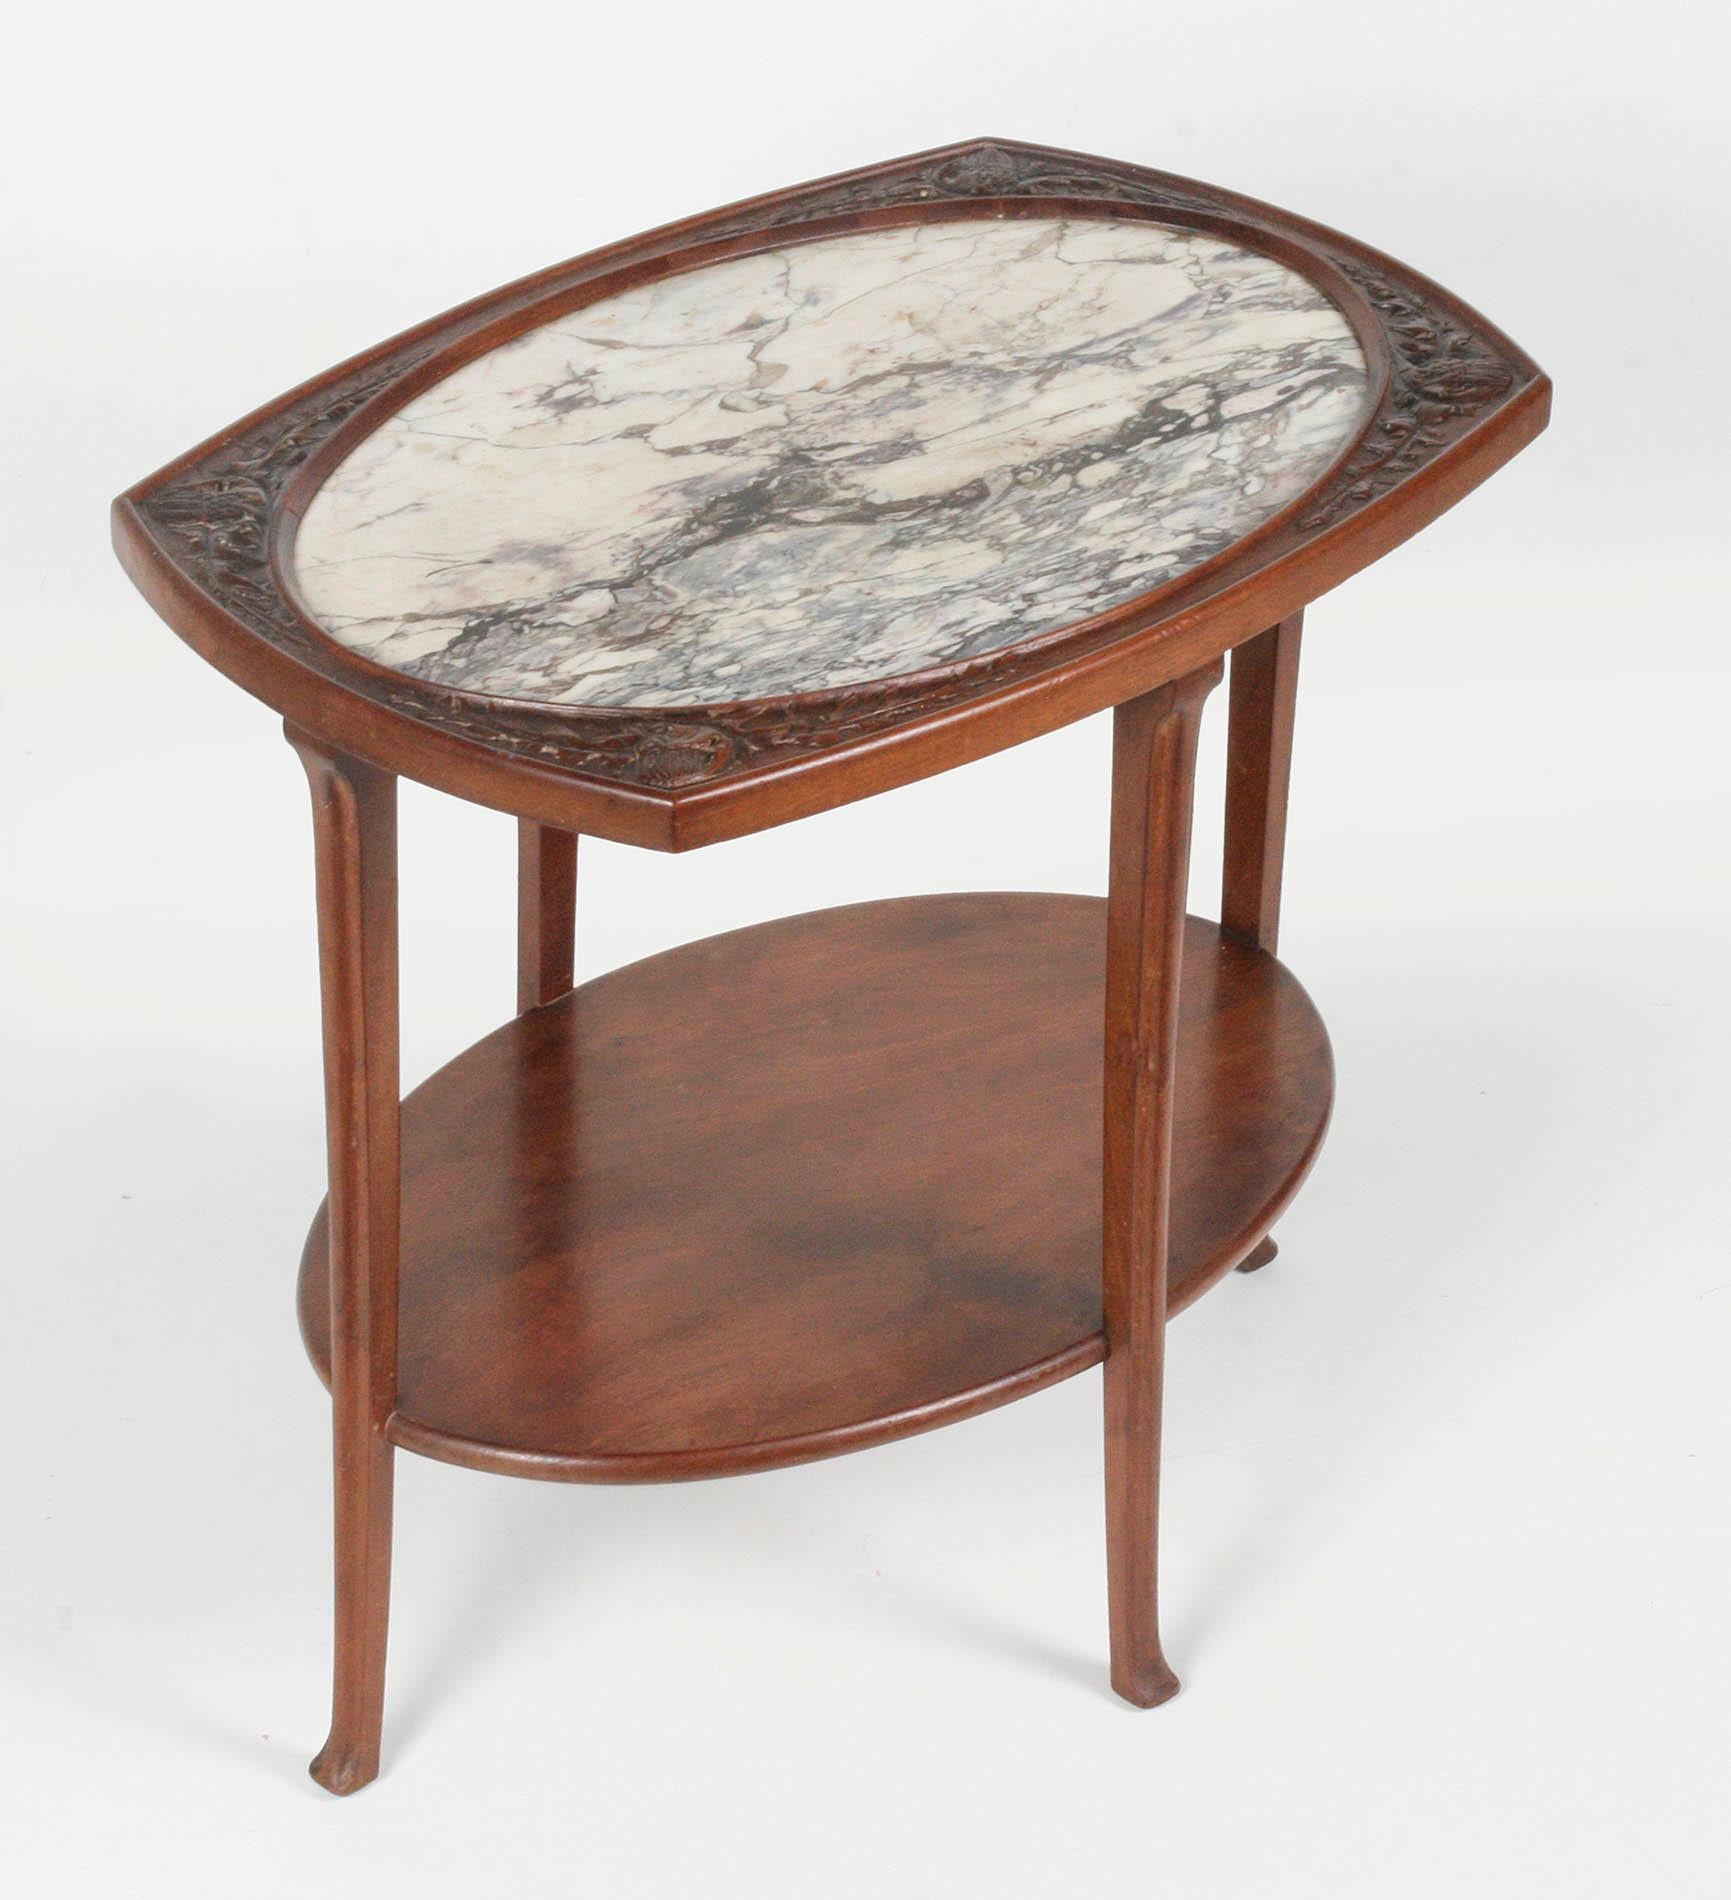 Elegant Art Nouveau side table with carved edges and marble top in the middle. The type of marble is Brescia violet.
The table was made in France, circa 1910. Typical Art Nouveau characteristics of this table are the elegantly shaped legs and the